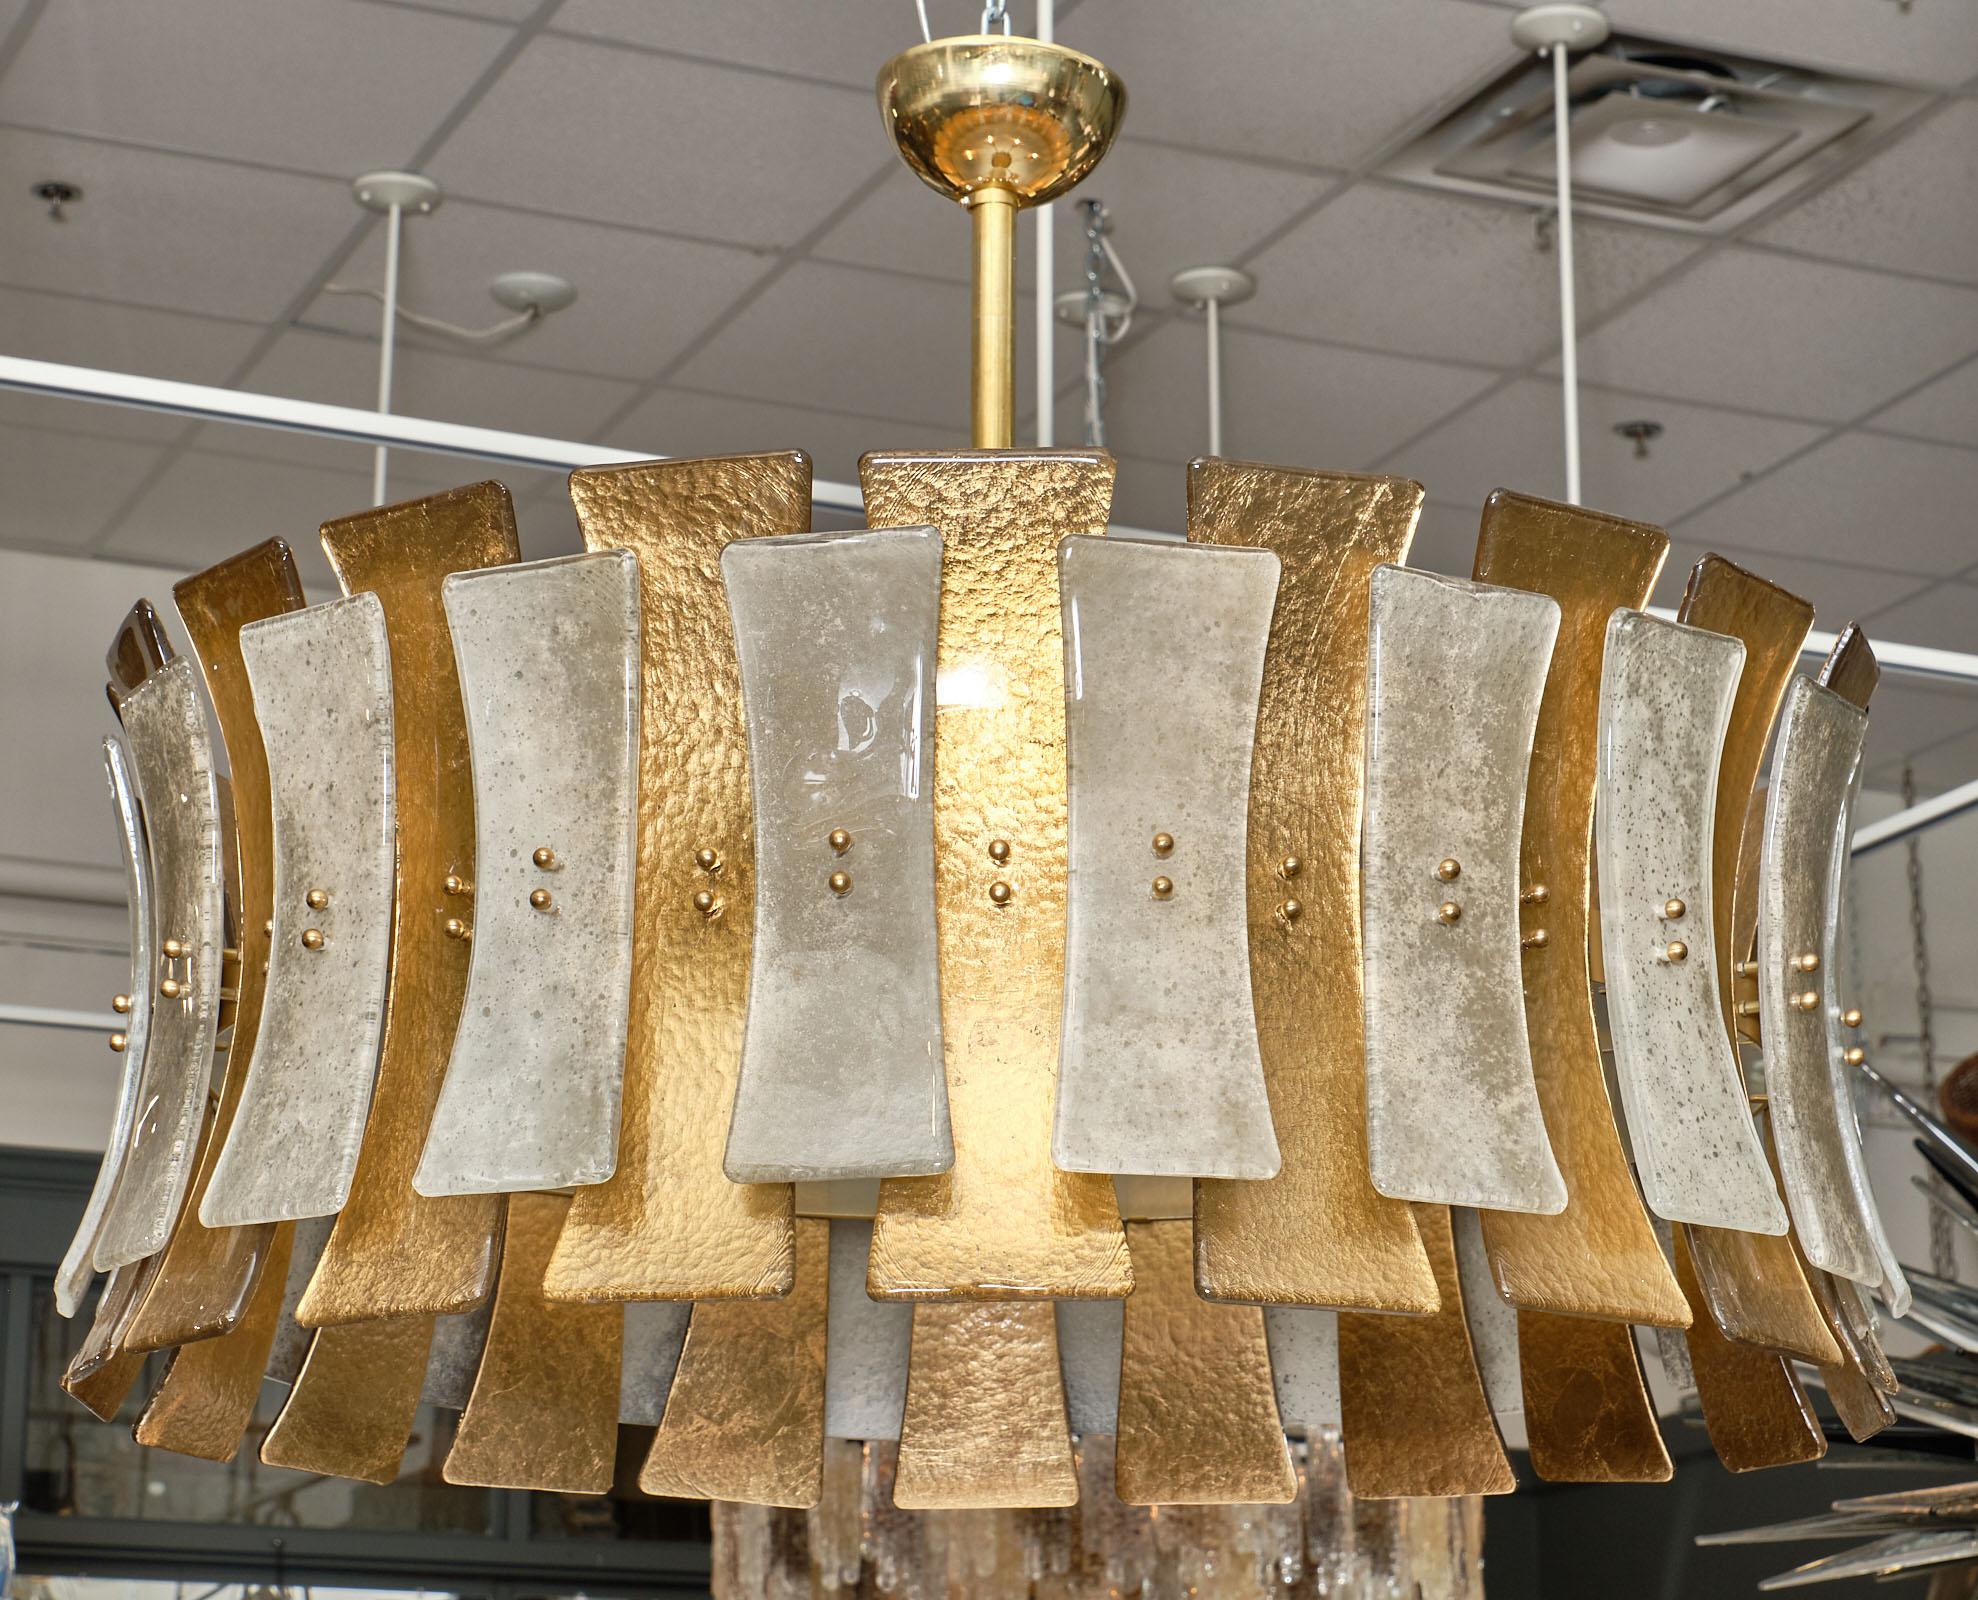 Murano glass “clessidre” chandelier with gold leaf fused glass elements in a drum-like style. The “clessidre” or hourglass shape of the glass creates elegant curves to this impressive fixture. It has been newly wired to fit US standards and hangs